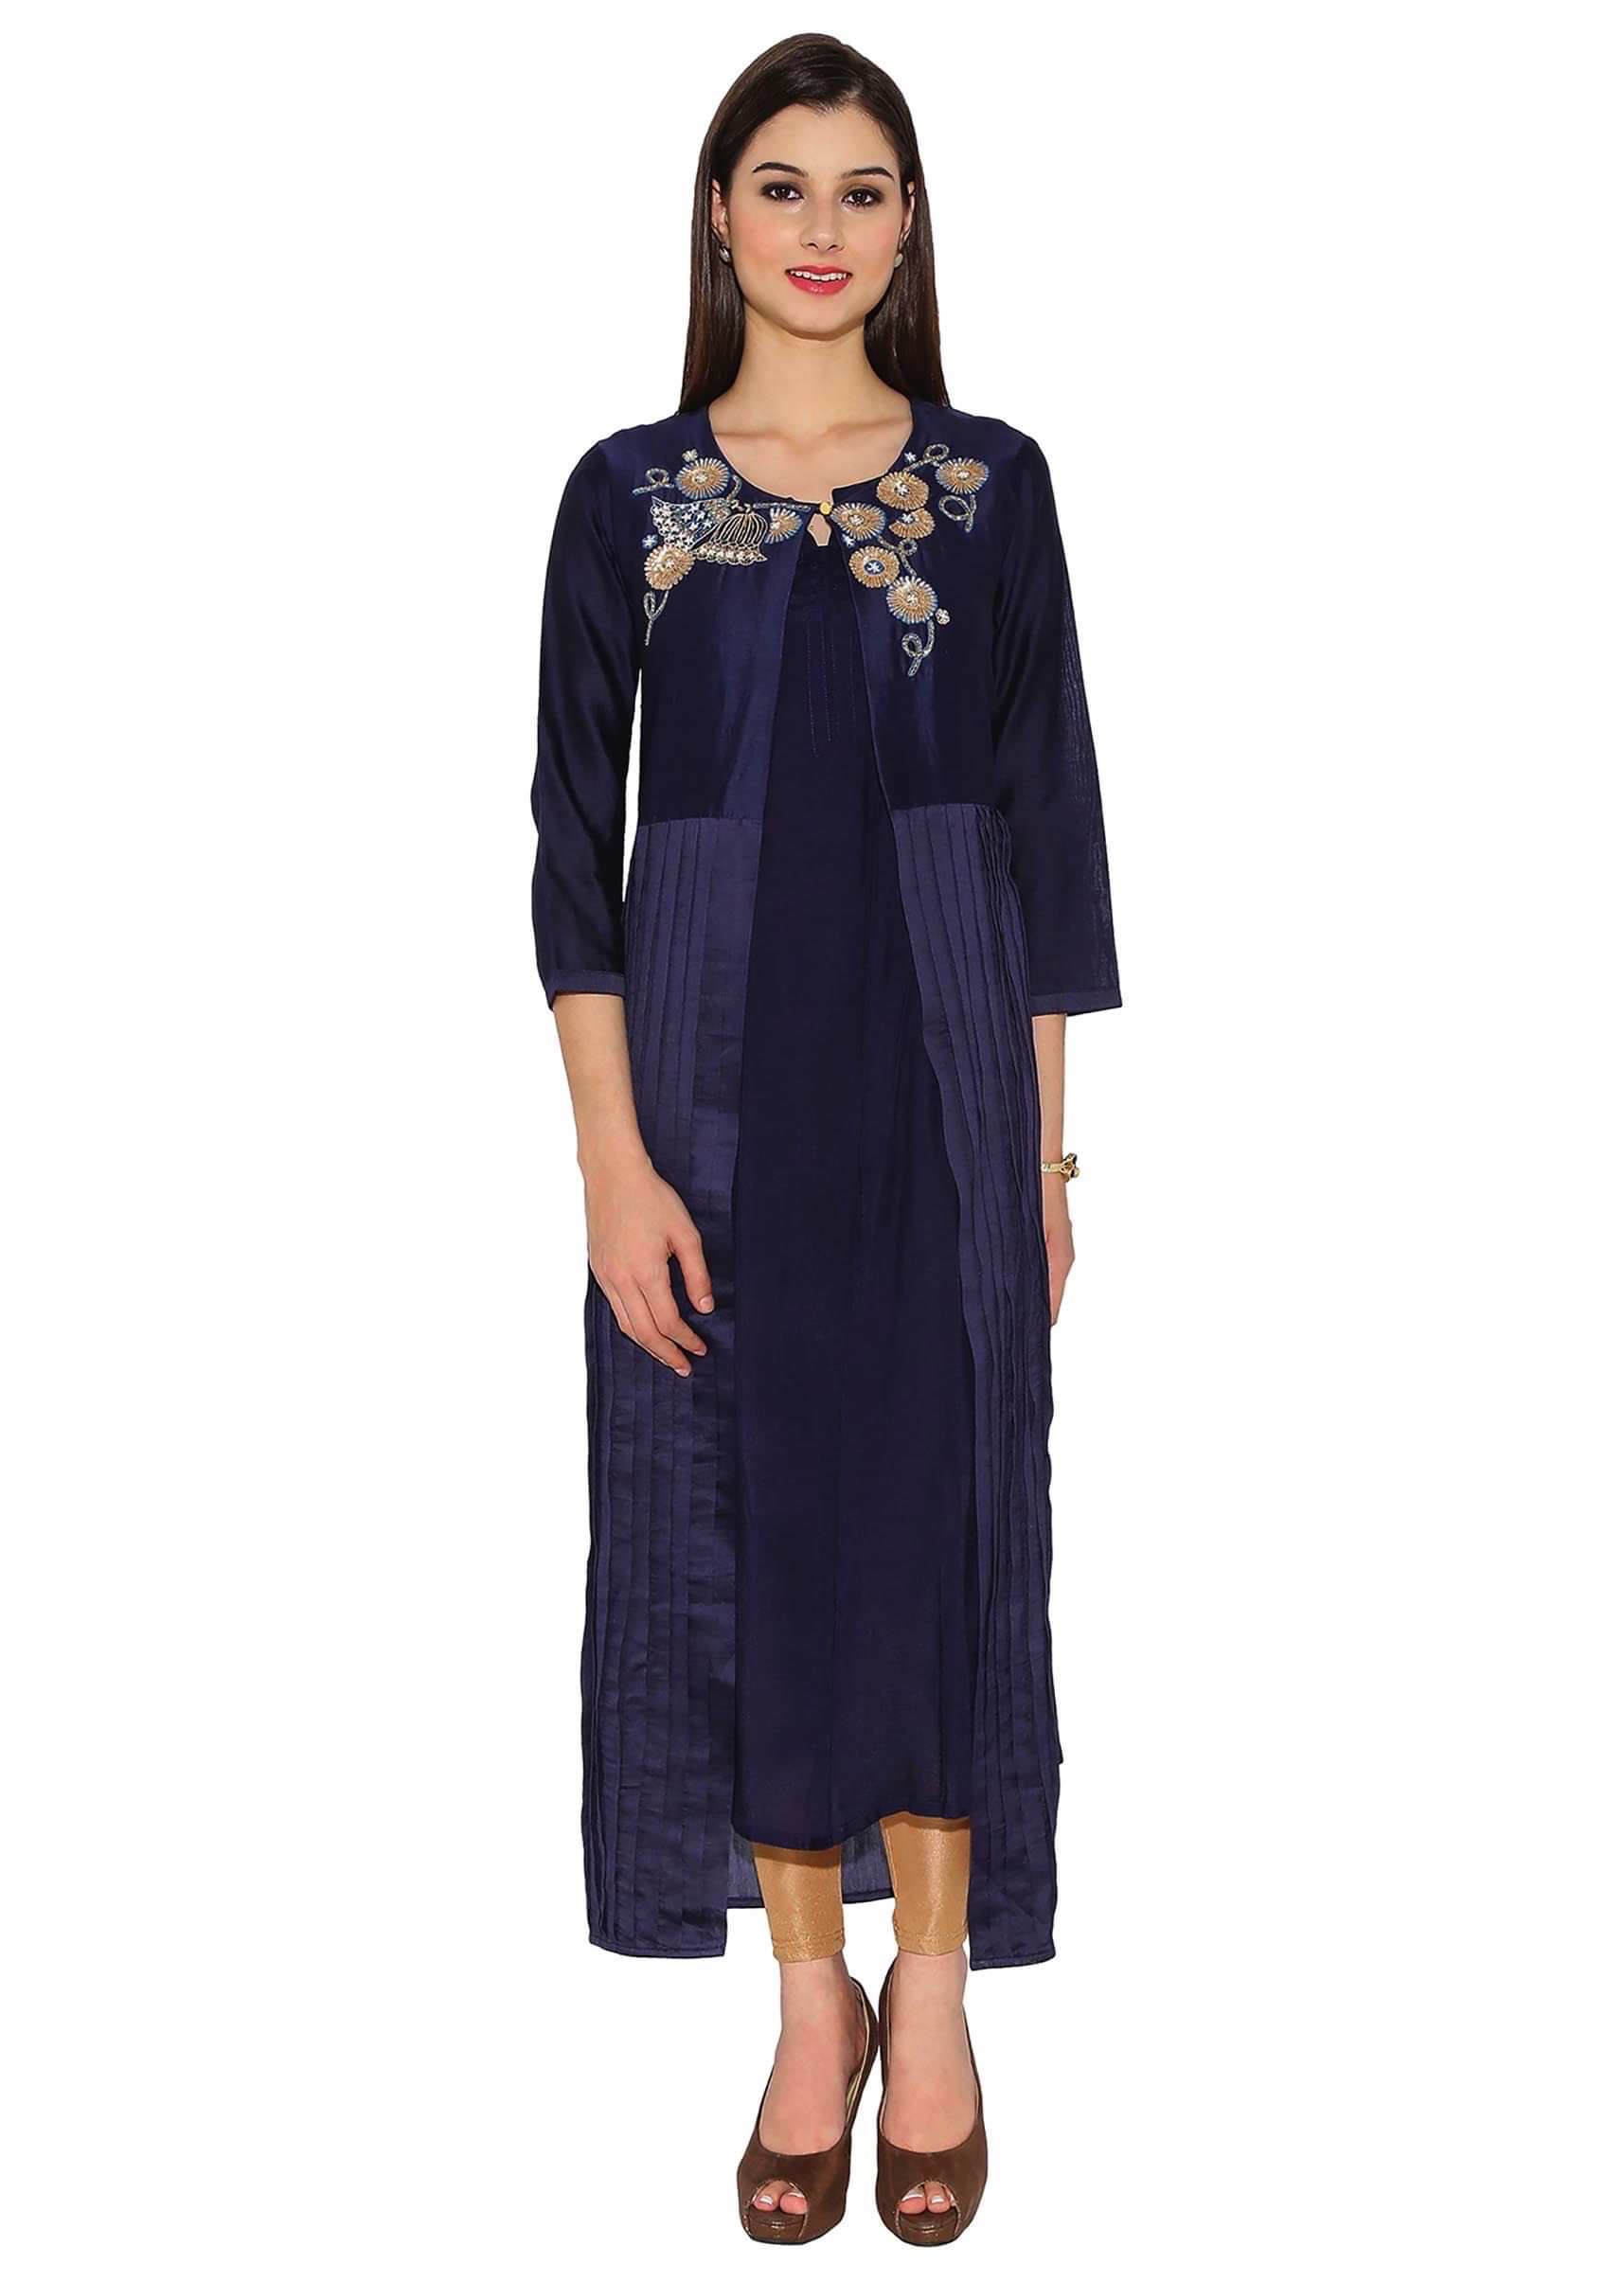 Midnight Blue Cotton Kurti With Single Button Top Jacket And Floral Motifs Around Collar Only On Kalki